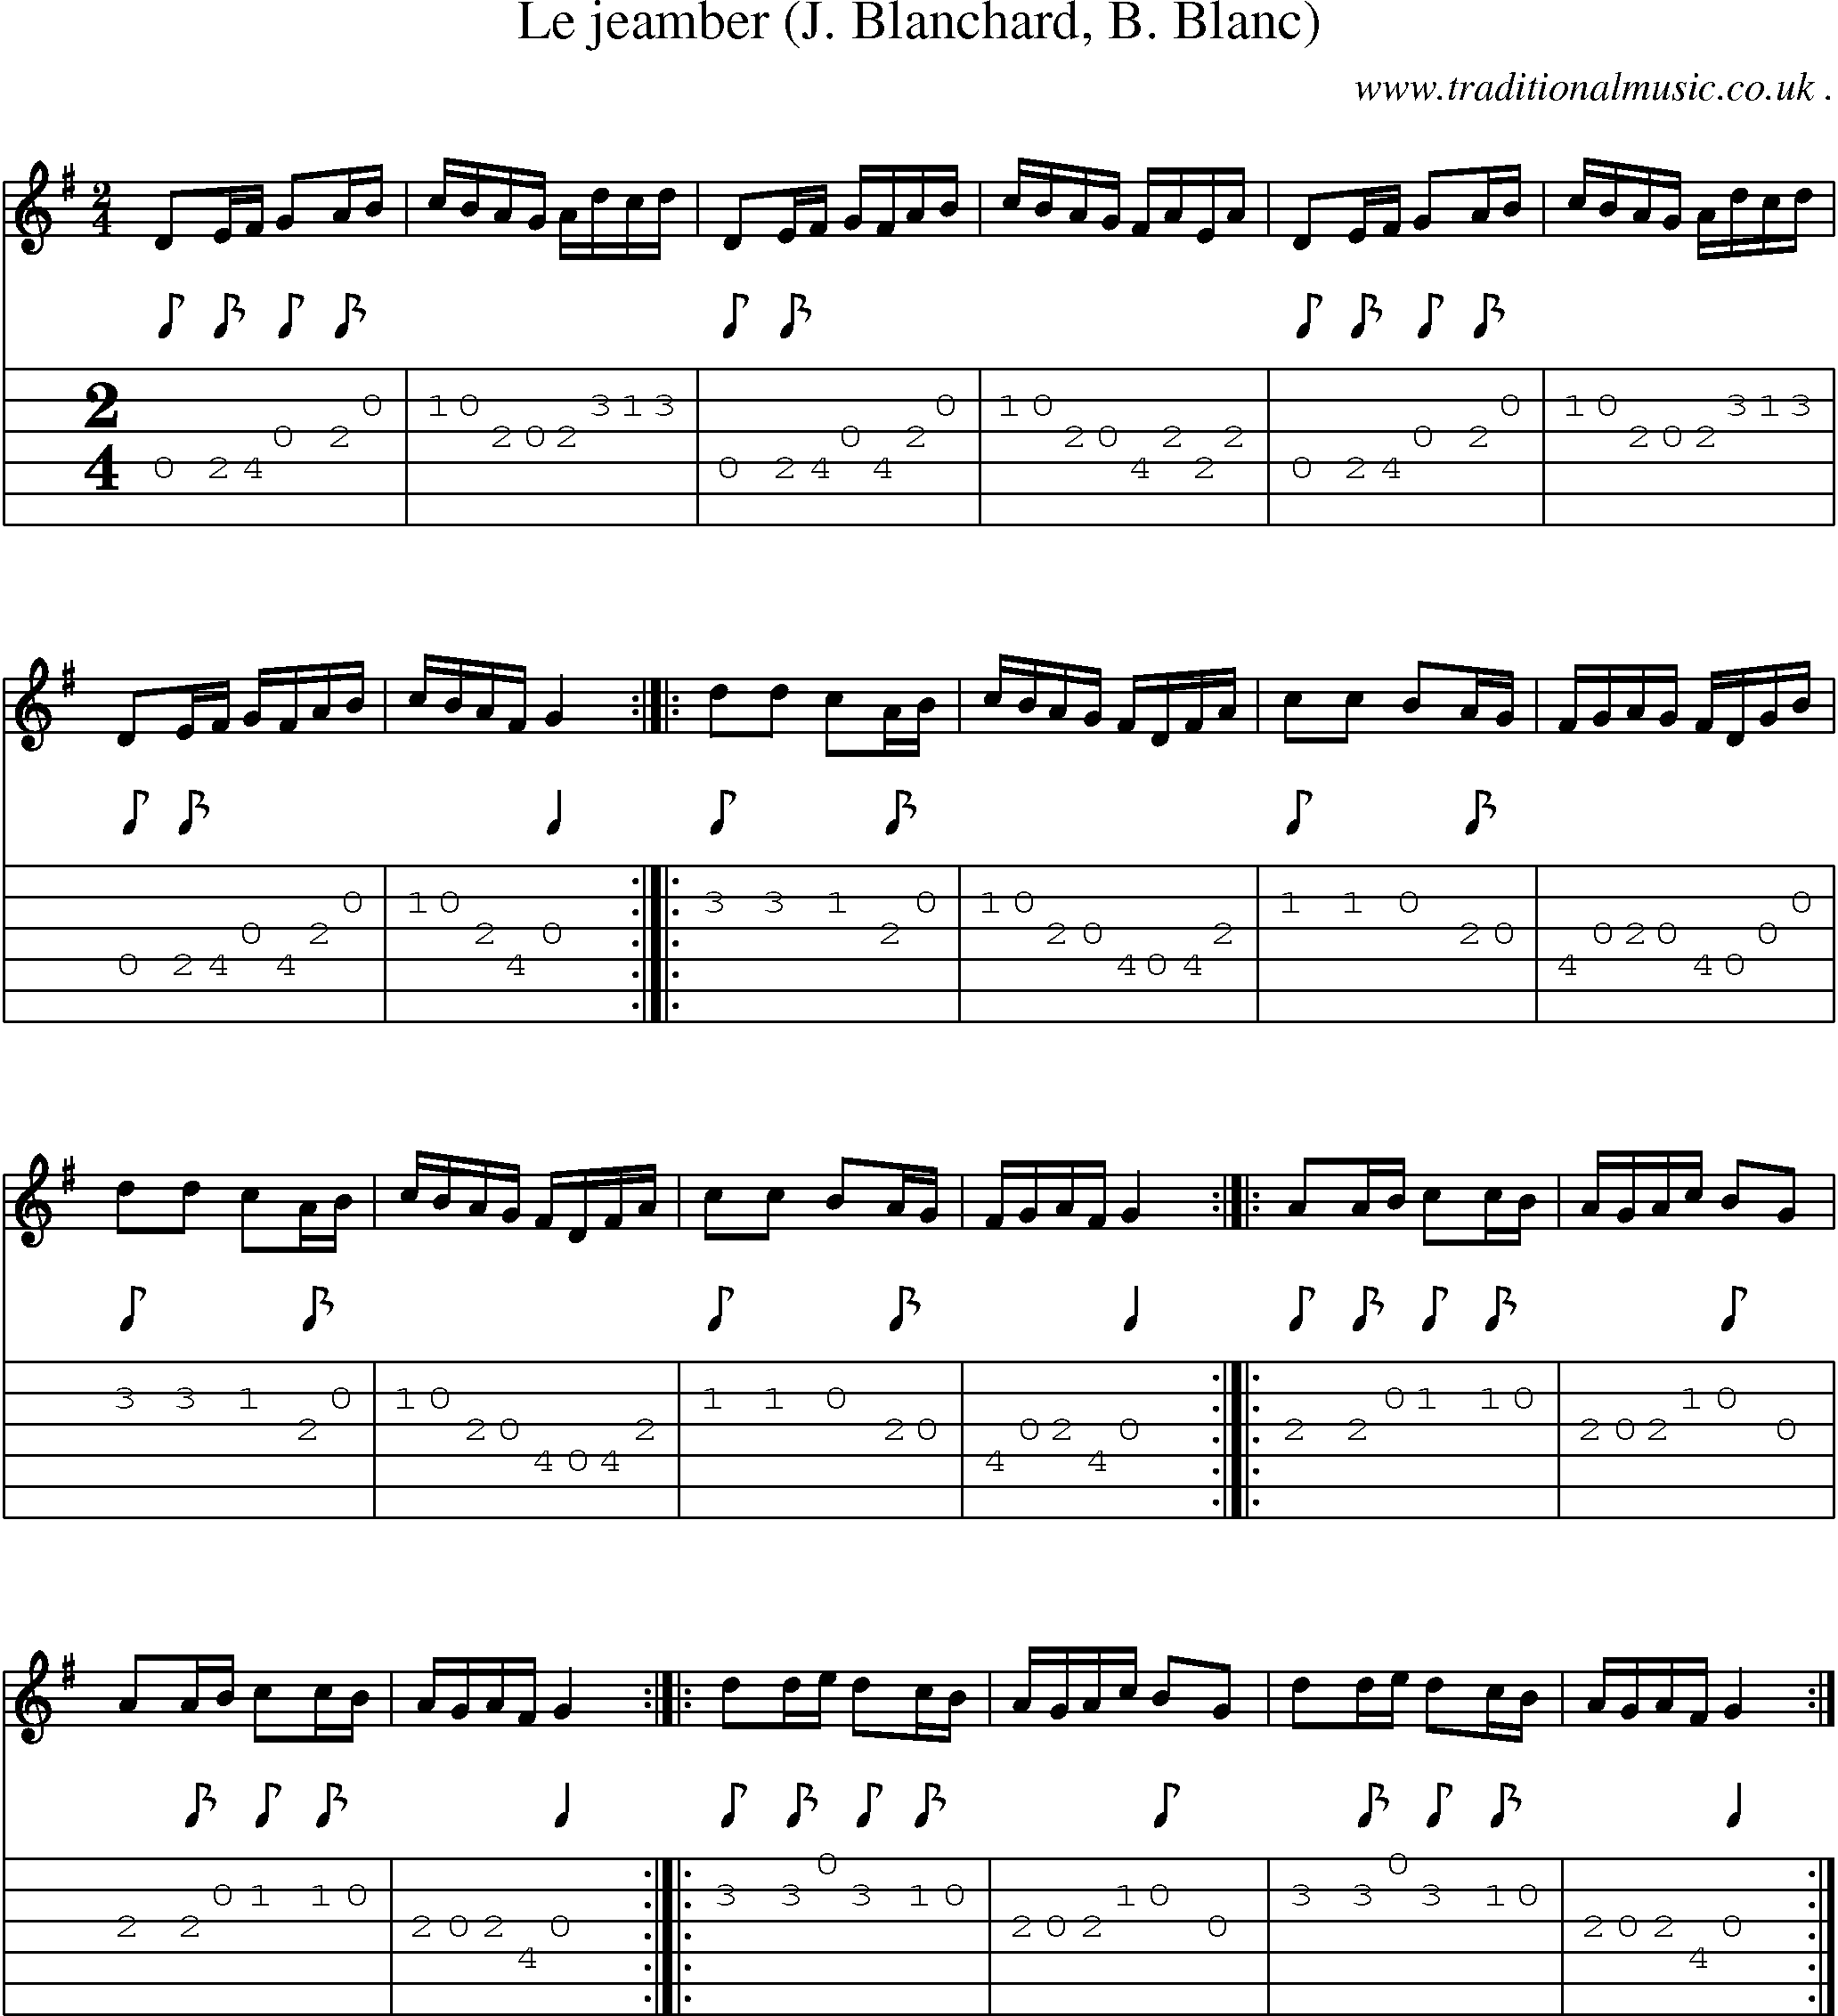 Sheet-Music and Guitar Tabs for Le Jeamber (j Blanchard B Blanc)